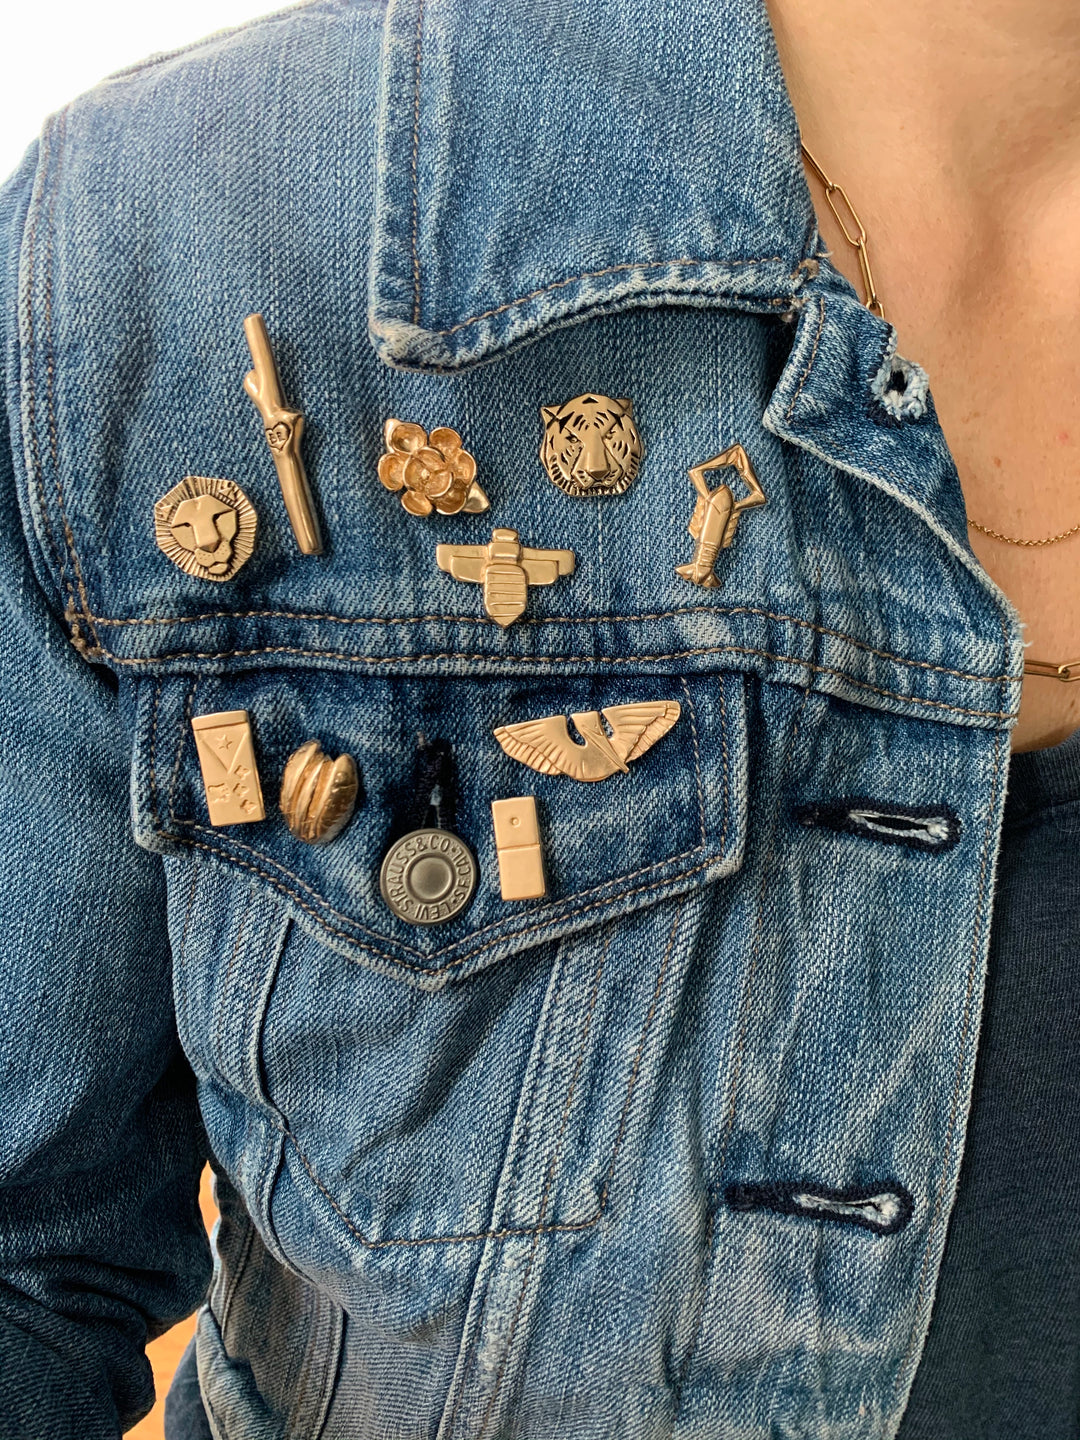 Jean Jacket Displaying Multiple Bronze Tie and Lapel Pins